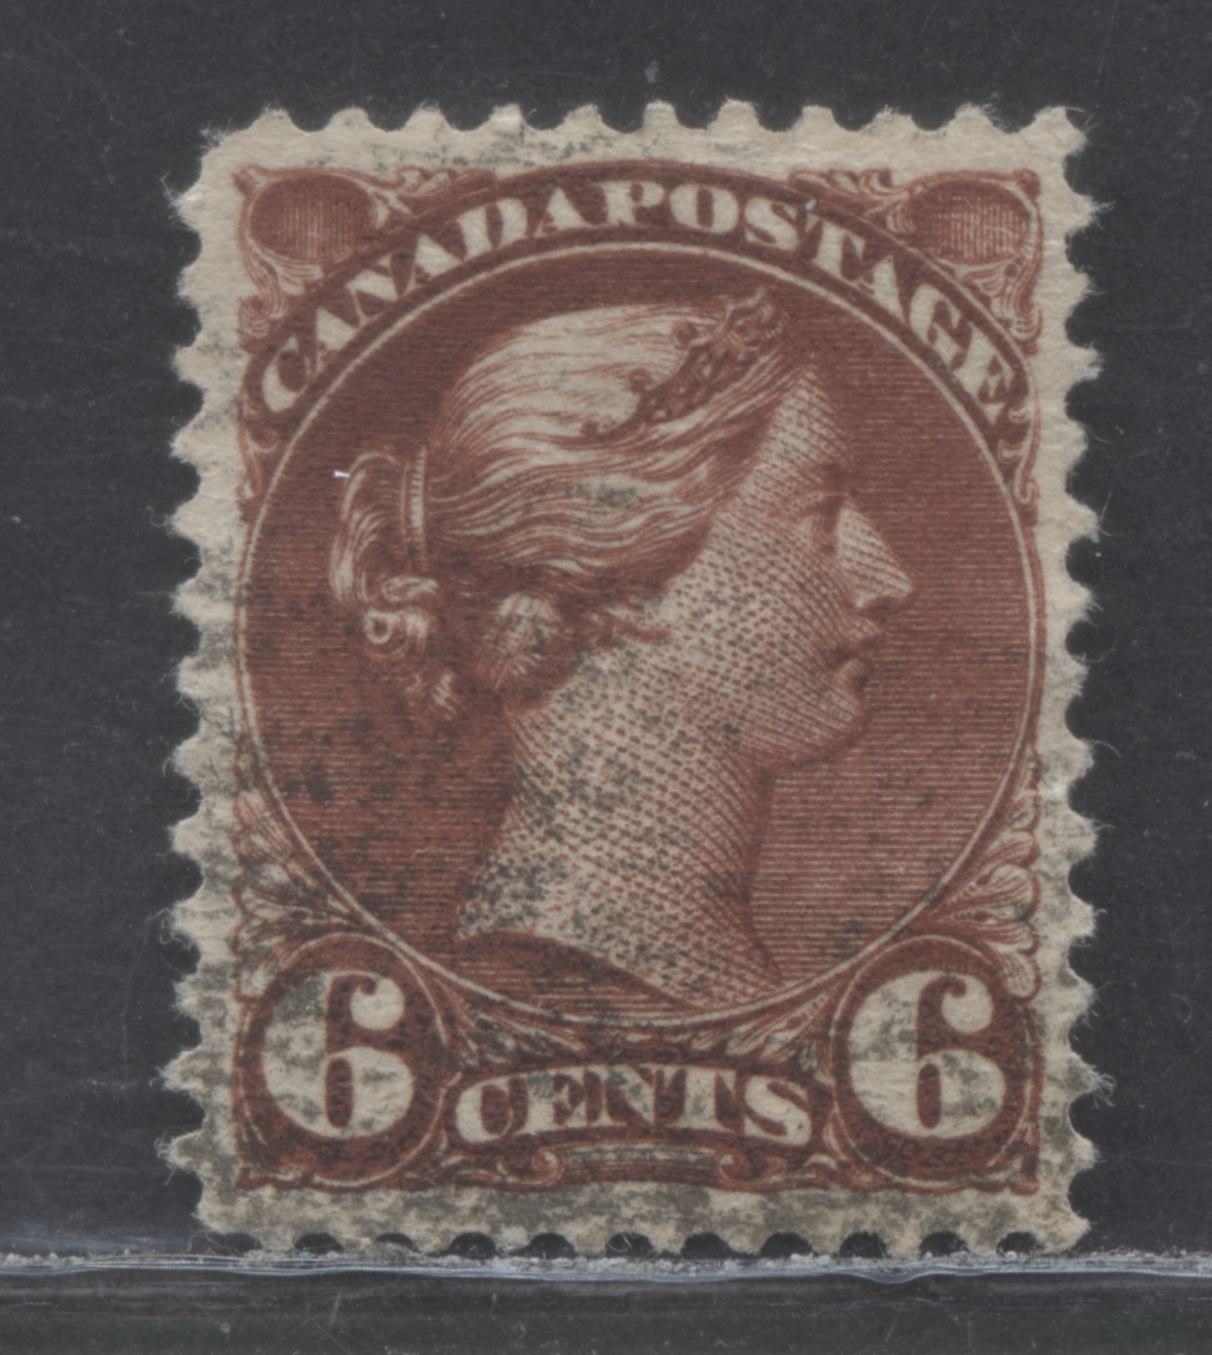 Lot 10 Canada #43iv 6c Red Brown Queen Victoria, Post 1892 Small Queen Issue, A Fine Used Single Ottawa Printing On Horizontal Wove Paper With Minor Re-Entry, Perf 12